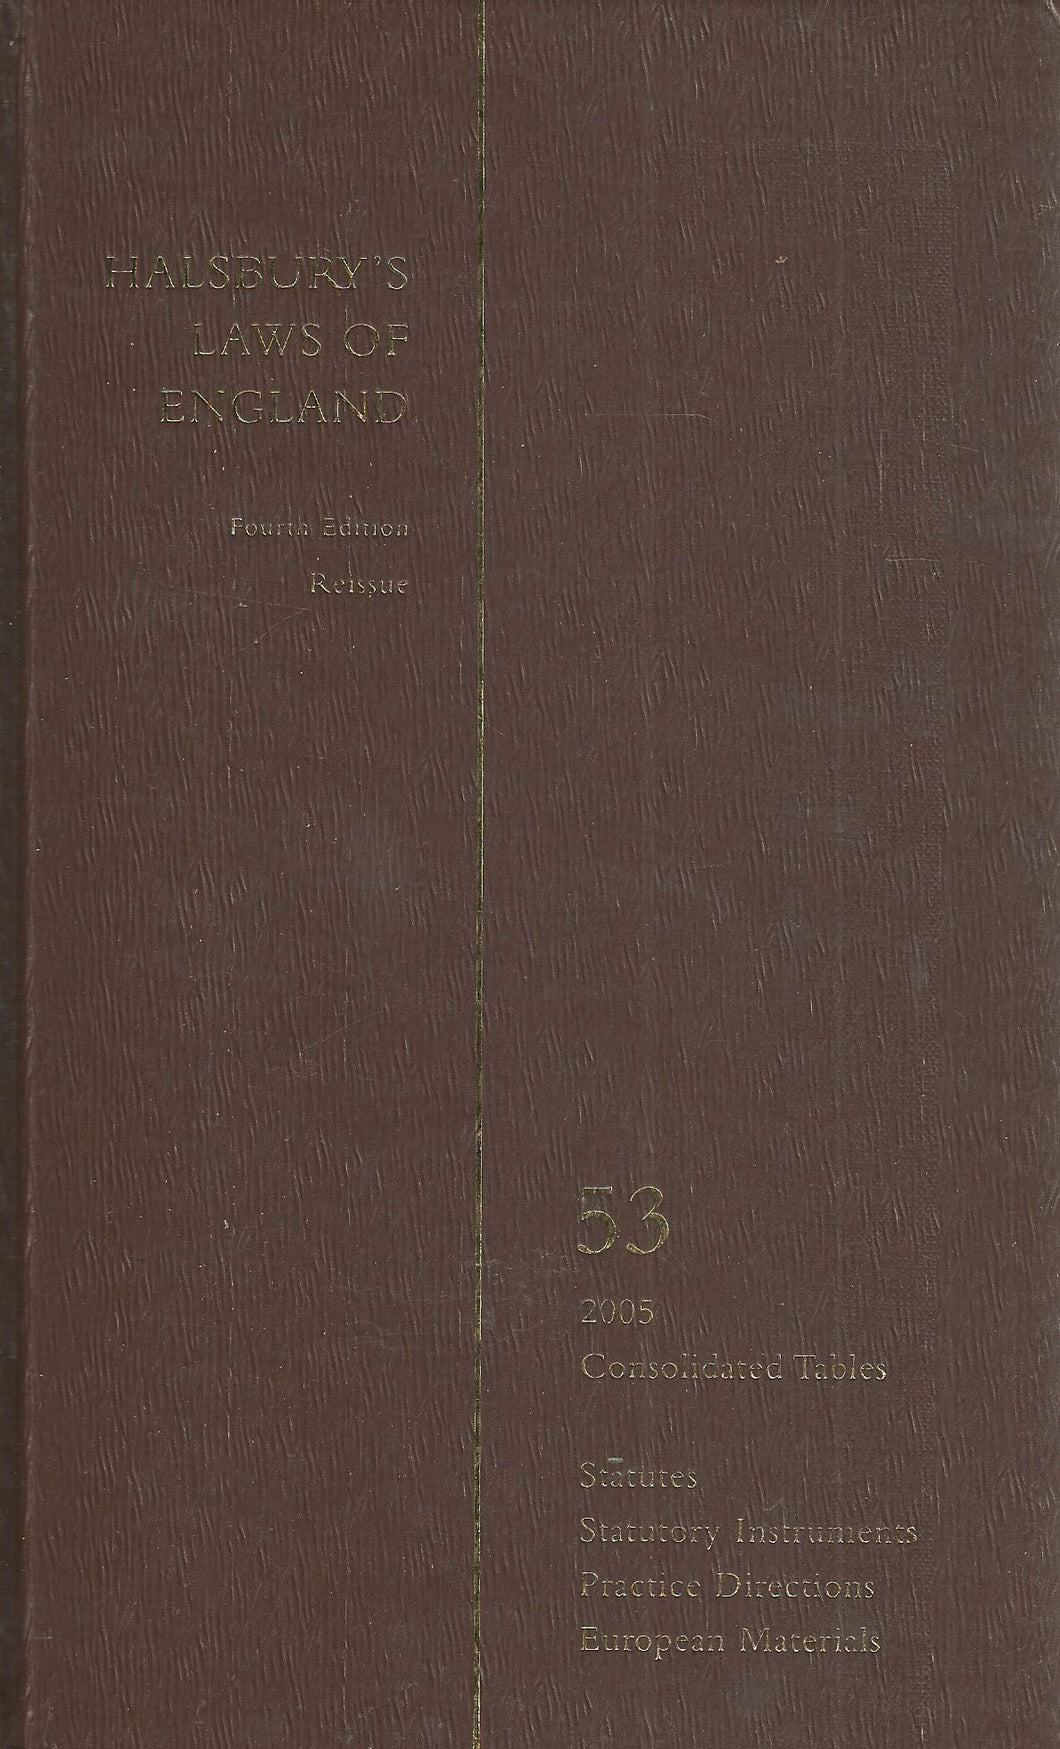 Halsbury's Laws of England - Fourth Edition Reissue, Volume 53 - Consolidated Tables; Statutes; Statutory Instruments; Practice Directions; European Materials